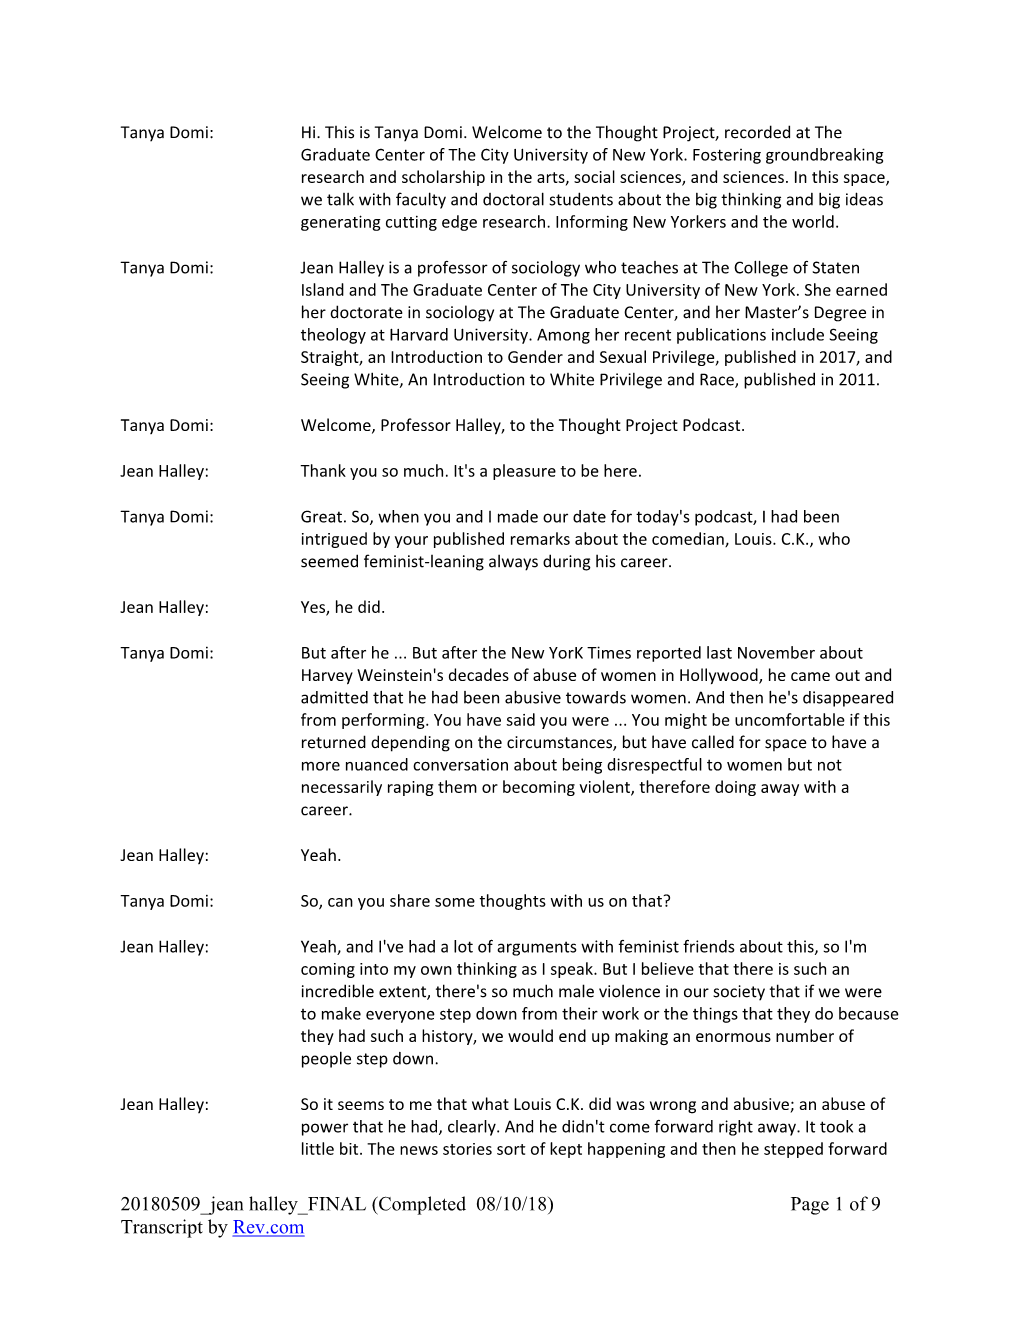 20180509 Jean Halley FINAL (Completed 08/10/18) Page 1 of 9 Transcript by Rev.Com and He Apologized